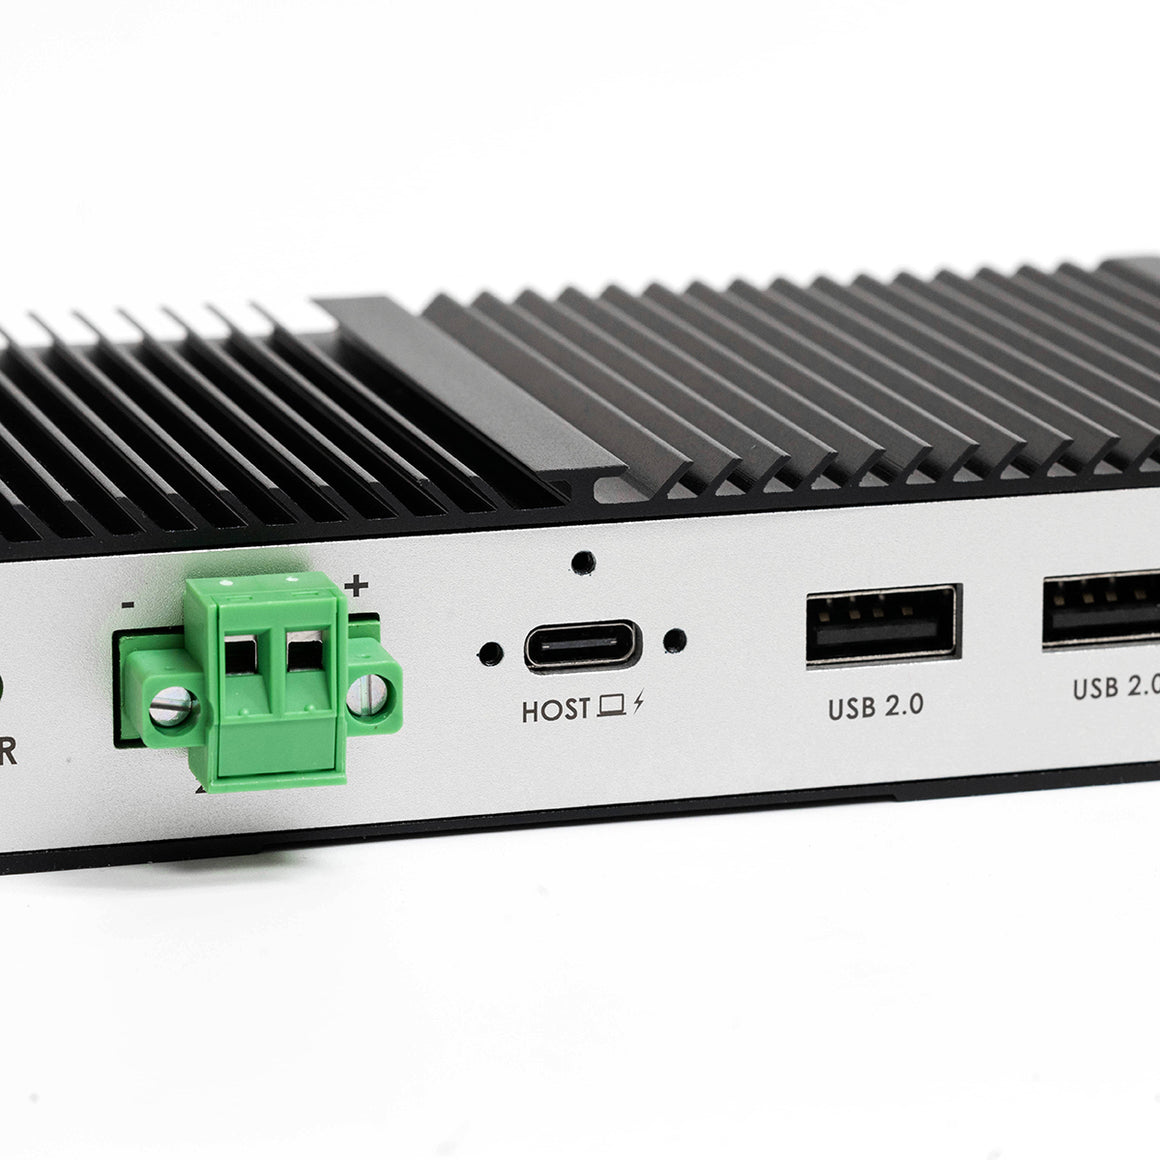 FIRENEX-UHUB-10G USB-C 10Gbps 7-Port Industrial Hub with Power Delivery